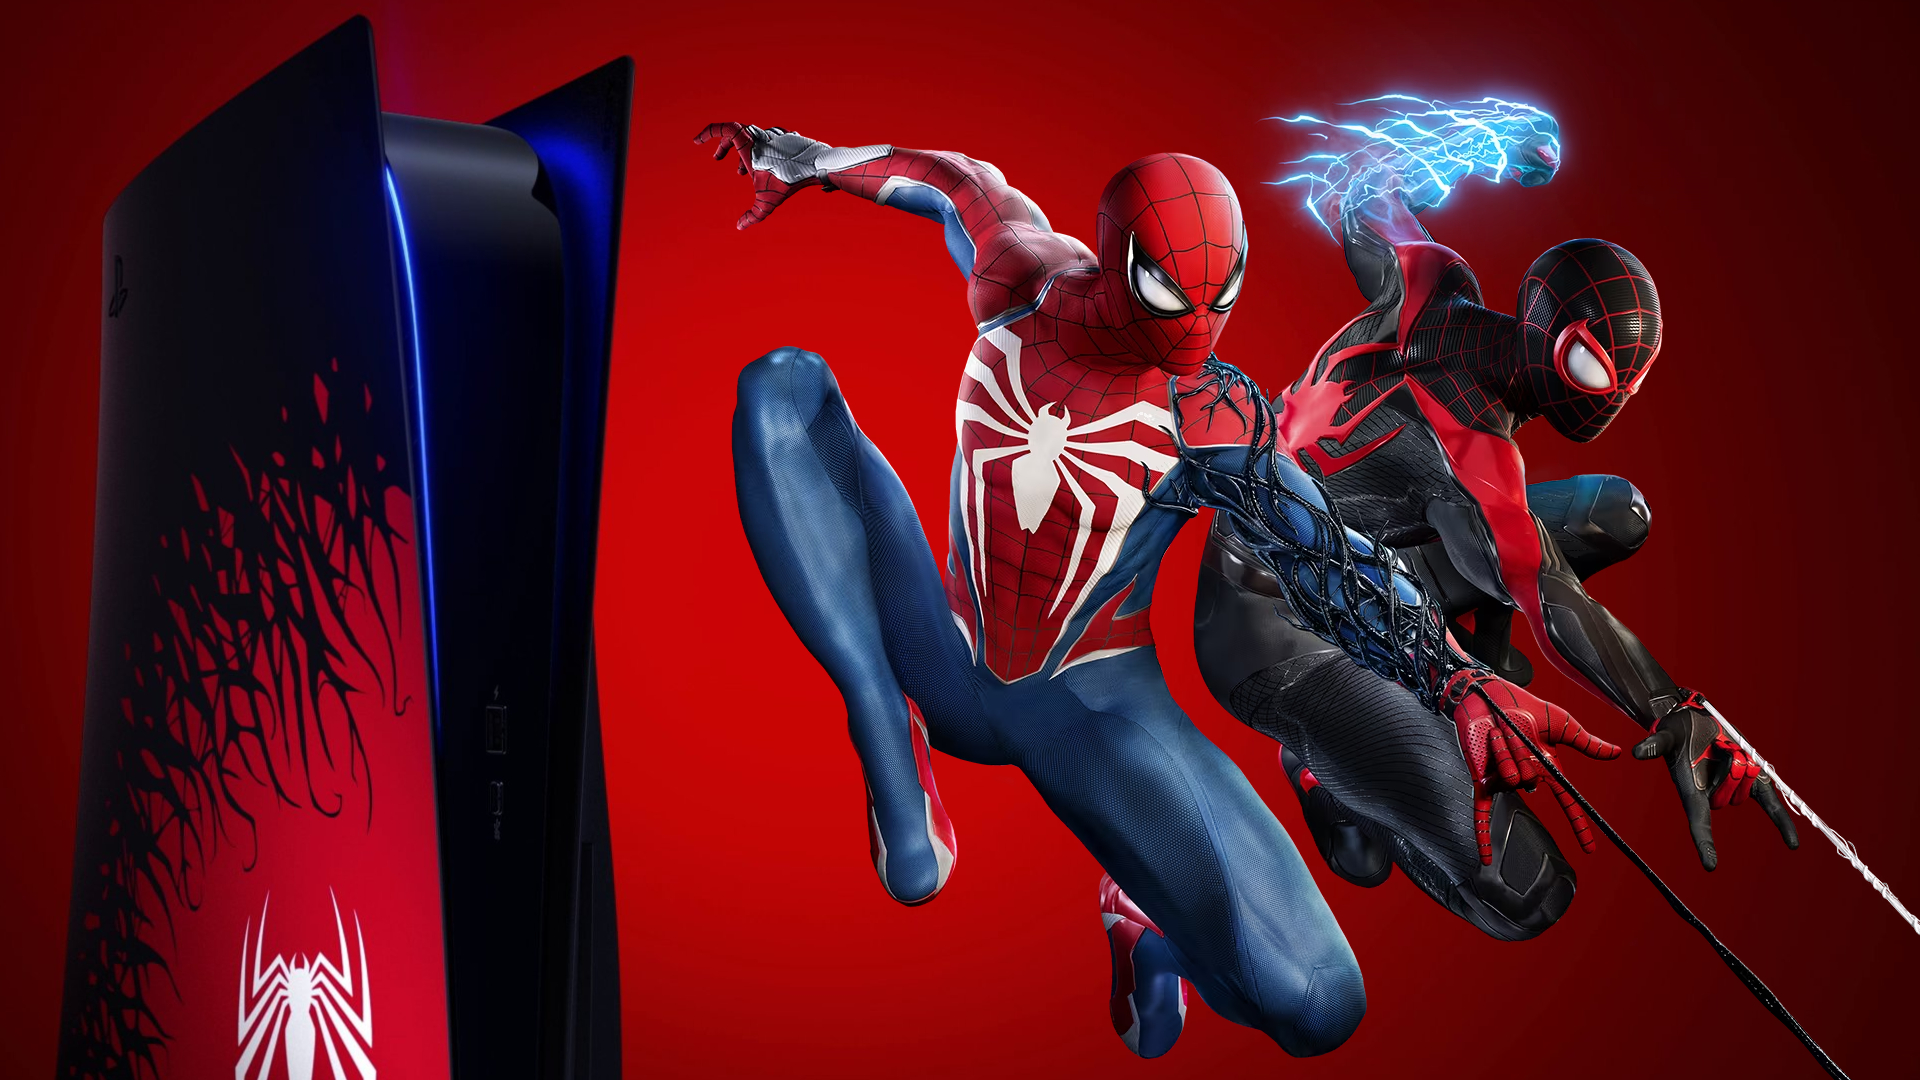 PlayStation reveals Marvel's Spider-Man 2 Limited Edition PS5 bundle -  Video Games on Sports Illustrated